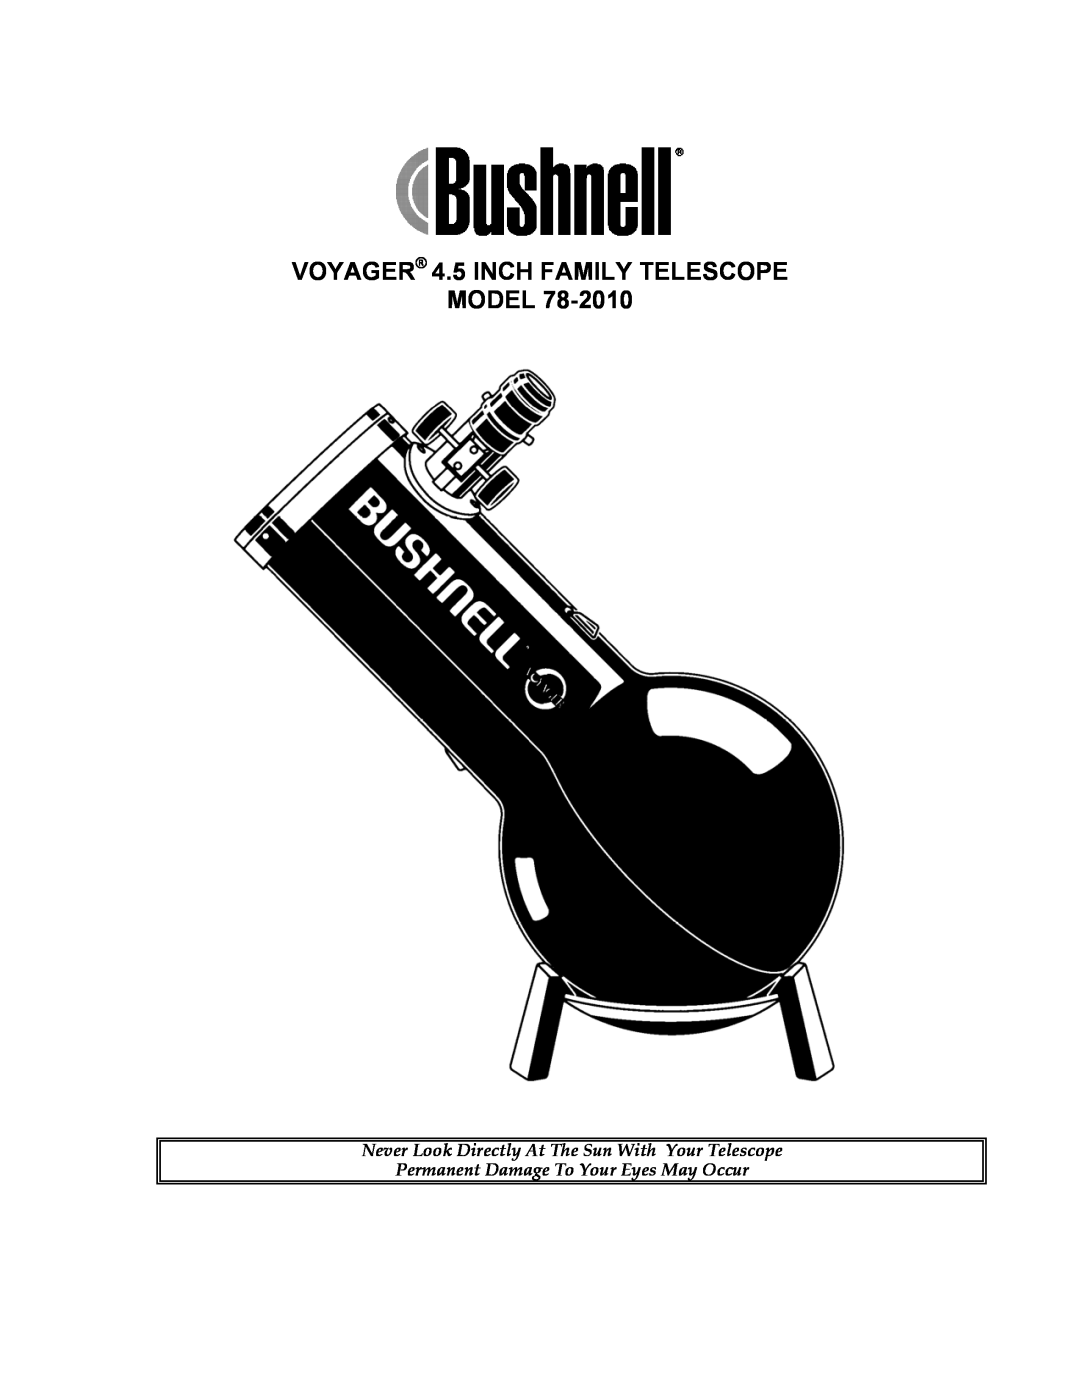 Bushnell 78-2010 manual VOYAGER 4.5 INCH FAMILY TELESCOPE MODEL, Never Look Directly At The Sun With Your Telescope 